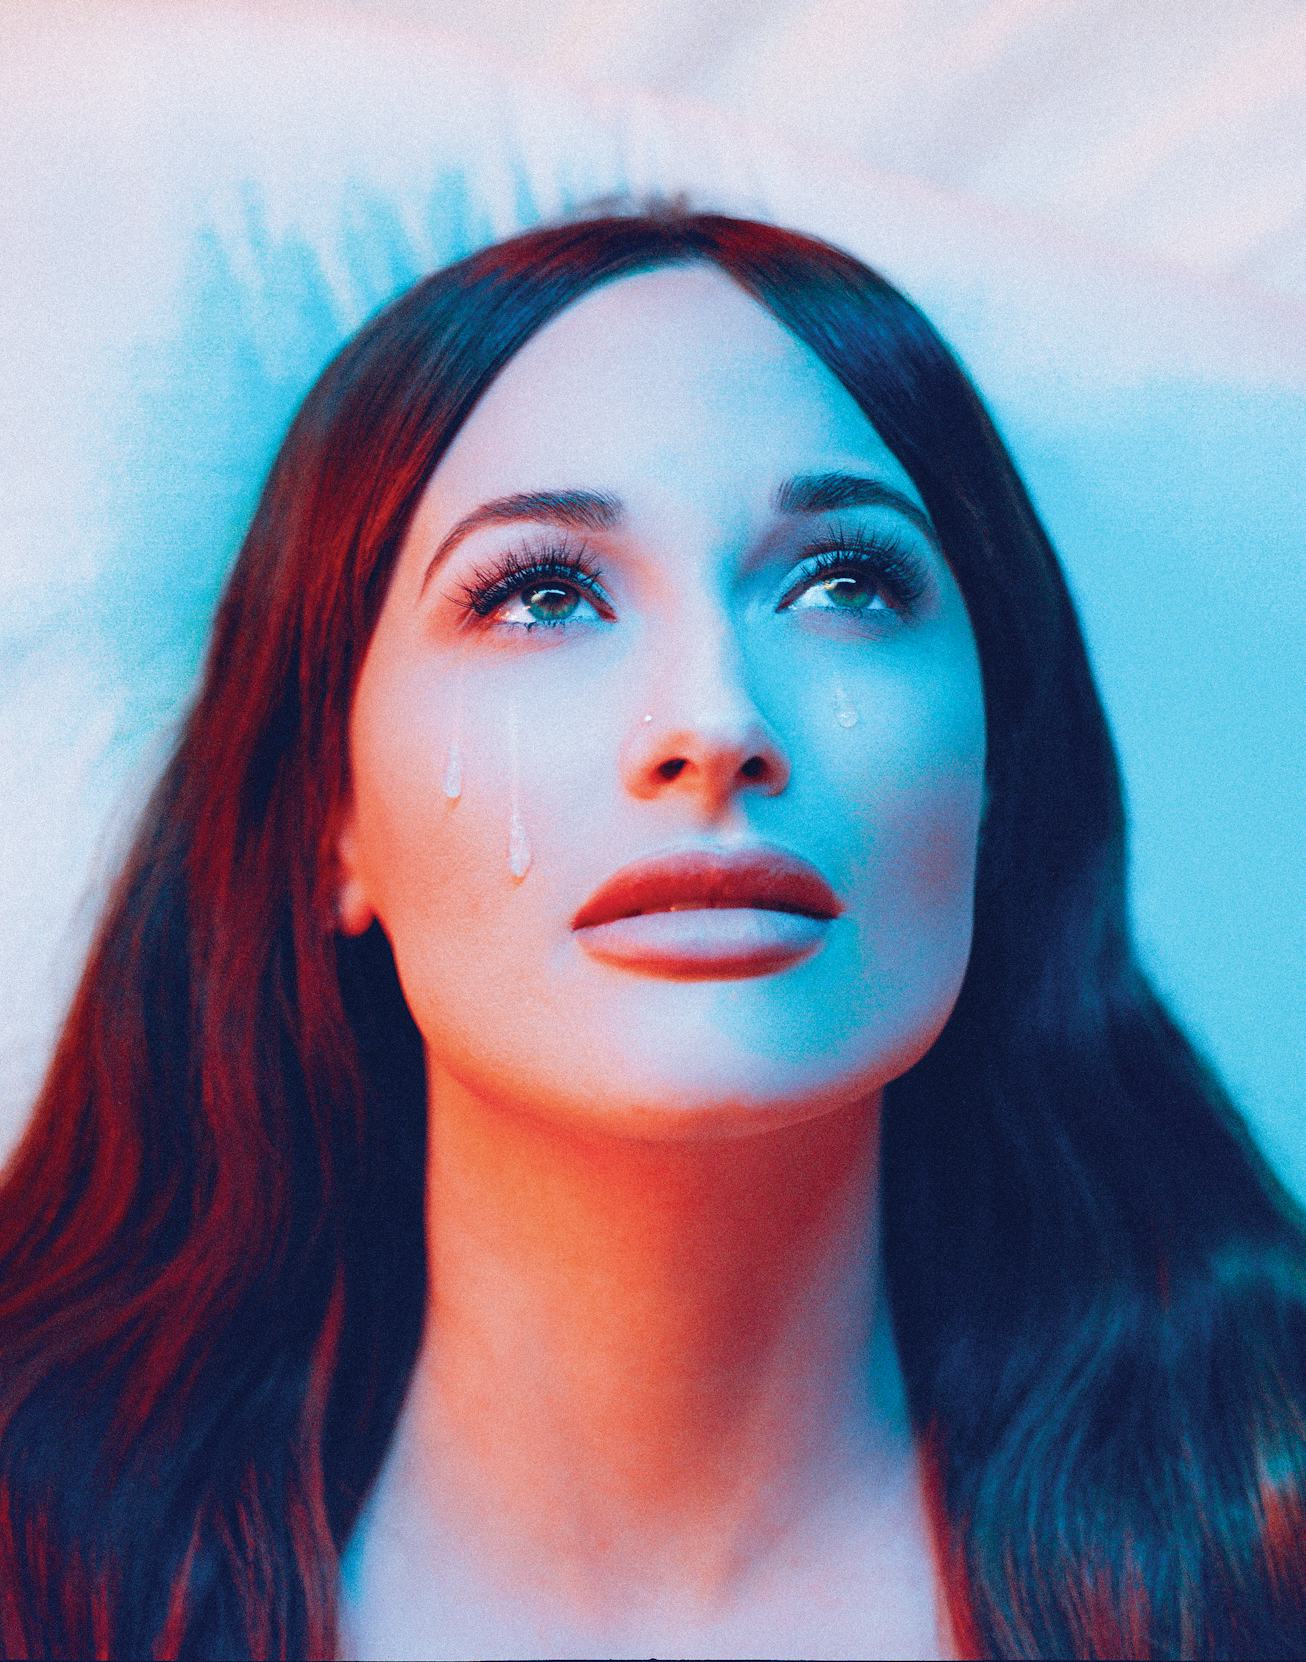 Kacey Musgraves' has unveiled details for her anticipated fourth studio album, 'Star-Crossed.'